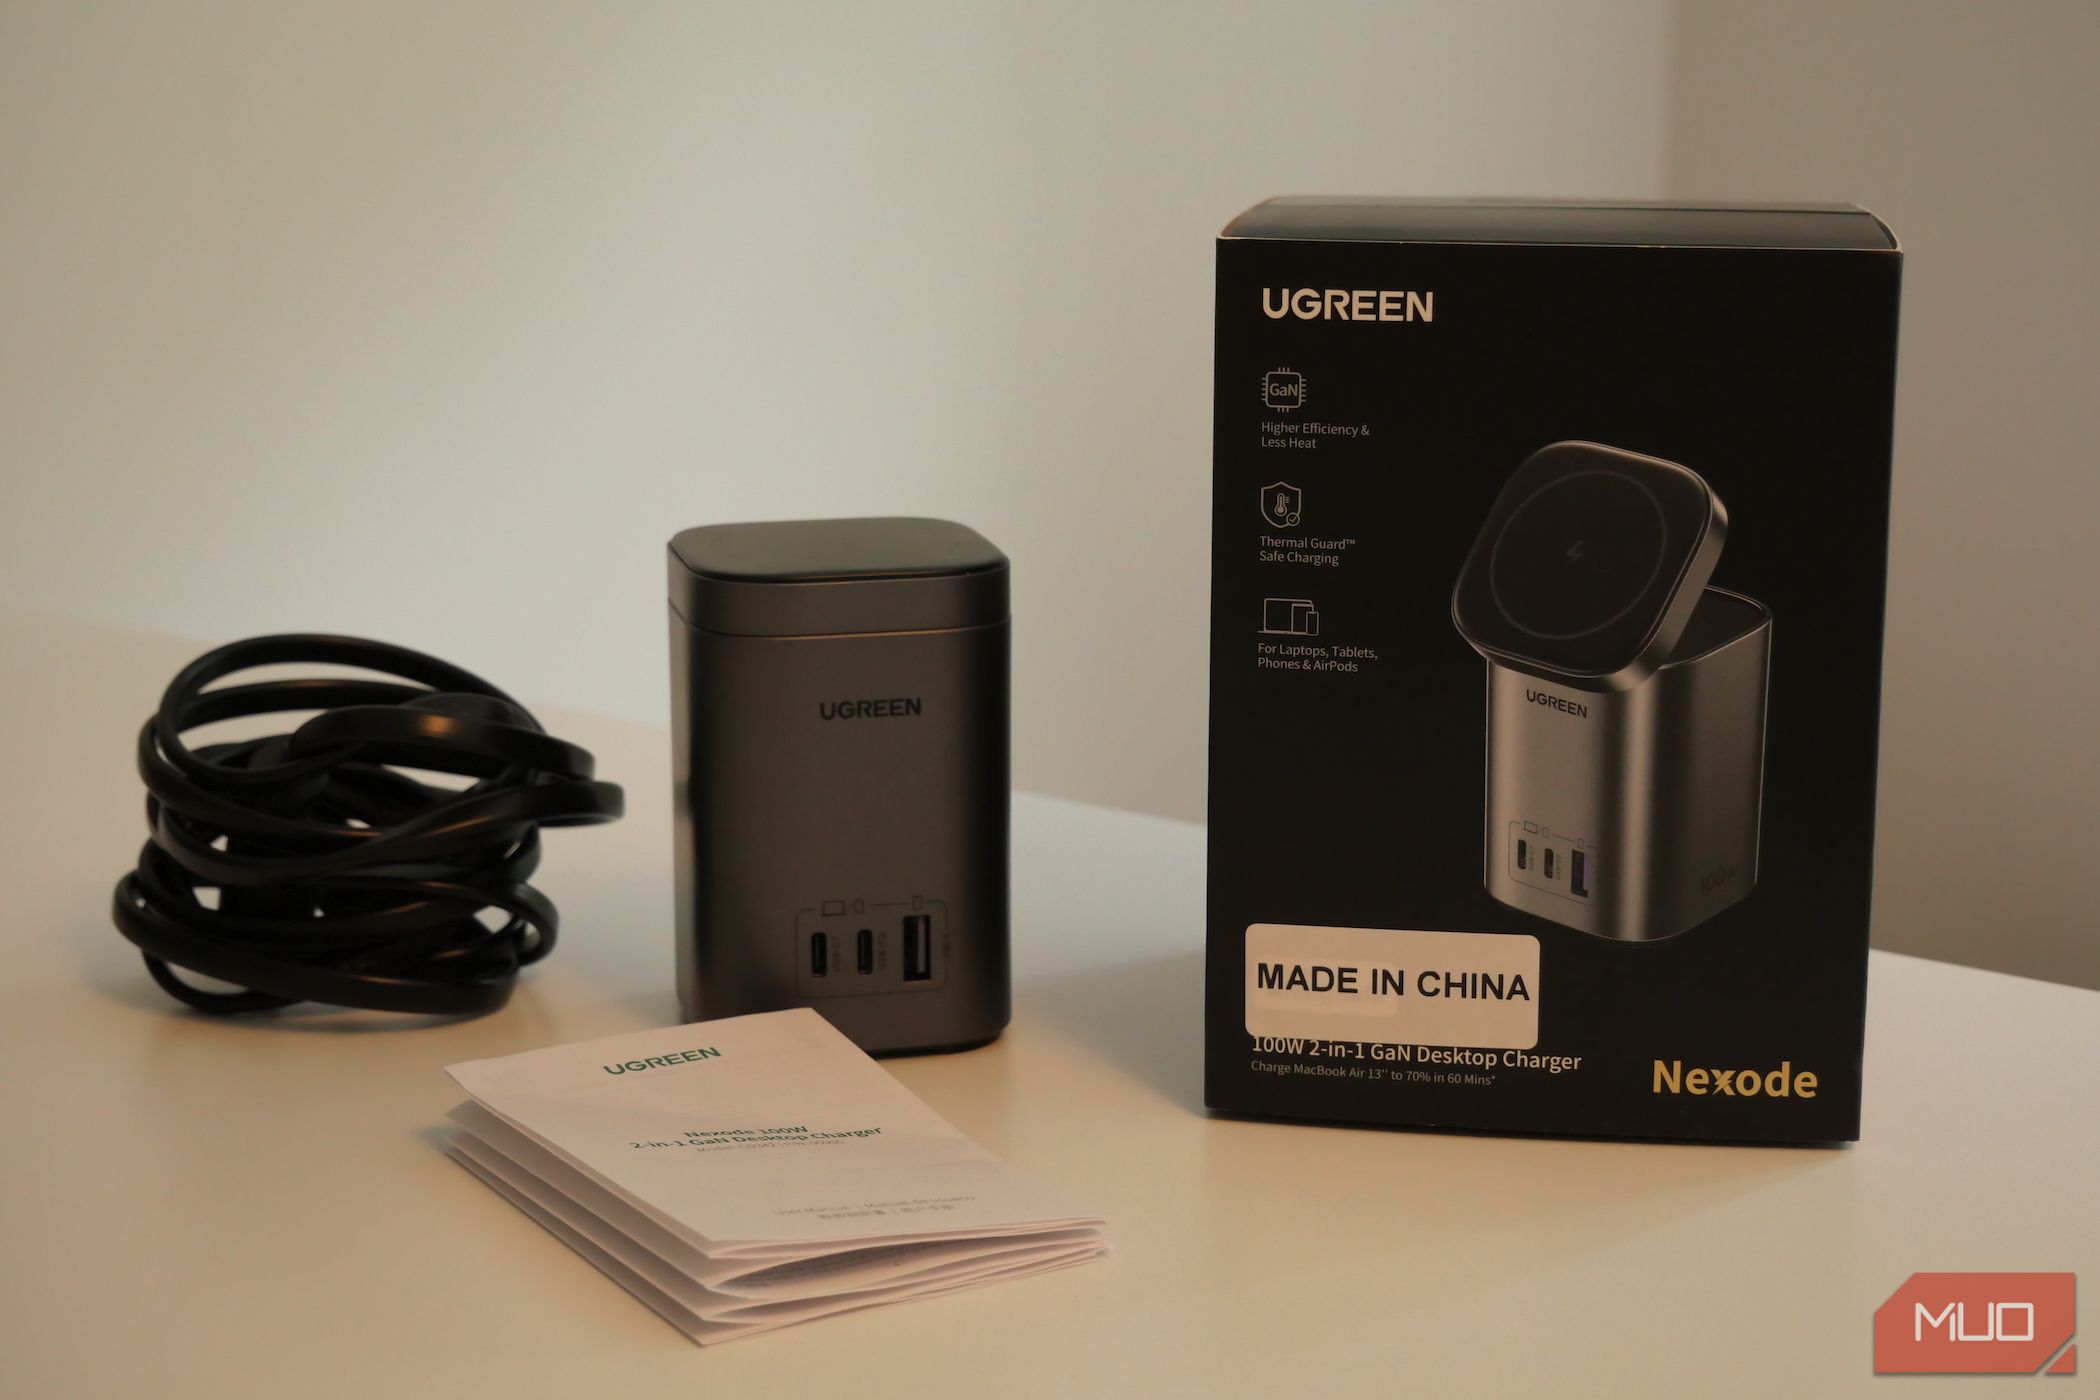 Ugreen Nexode 100W 2-in-1 GaN Desktop Charger Review: A Solid